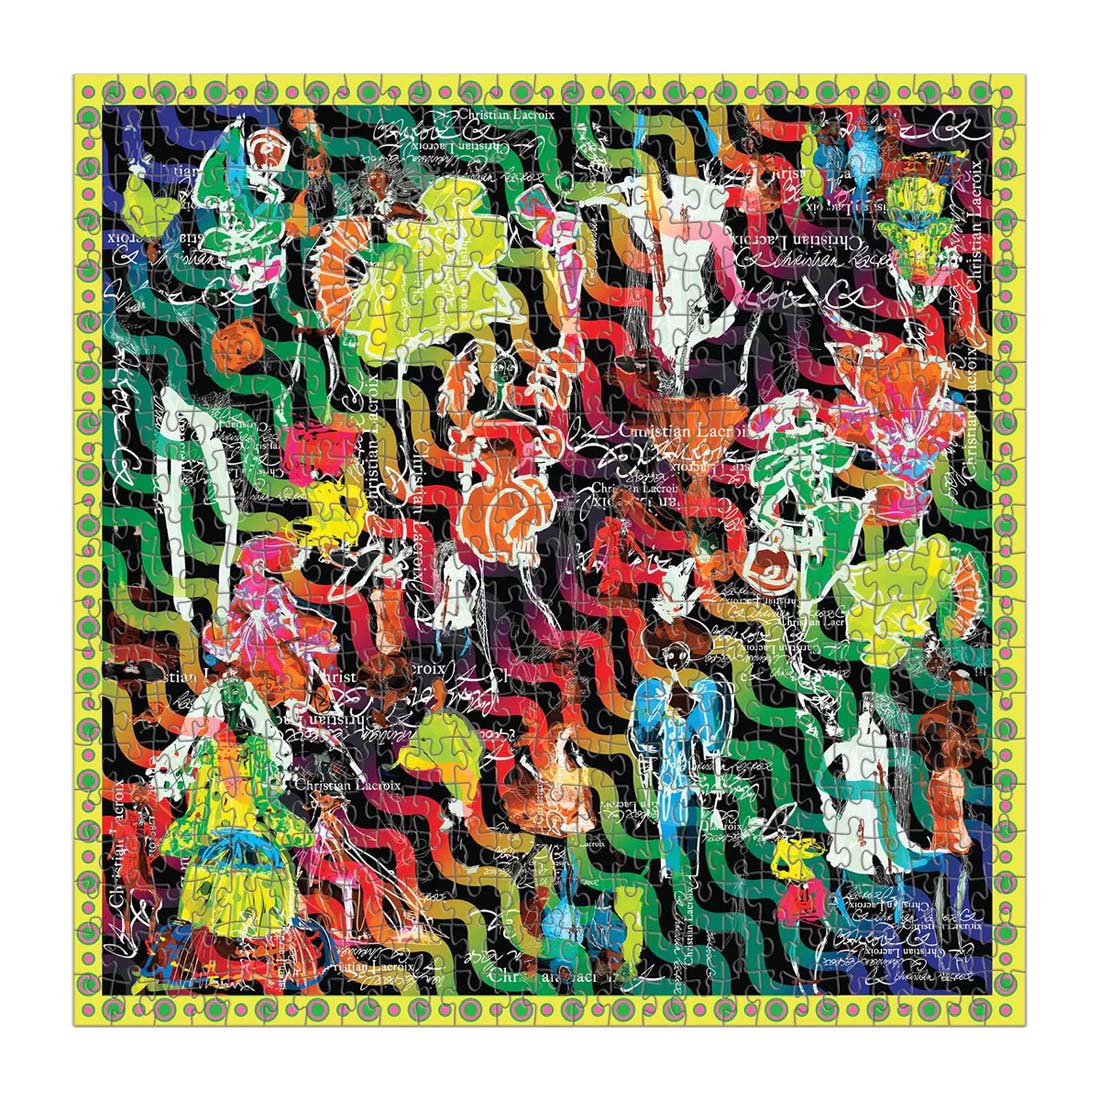 Christian Lacroix Ipanema Girls Double-Sided 500-Piece Jigsaw Puzzle